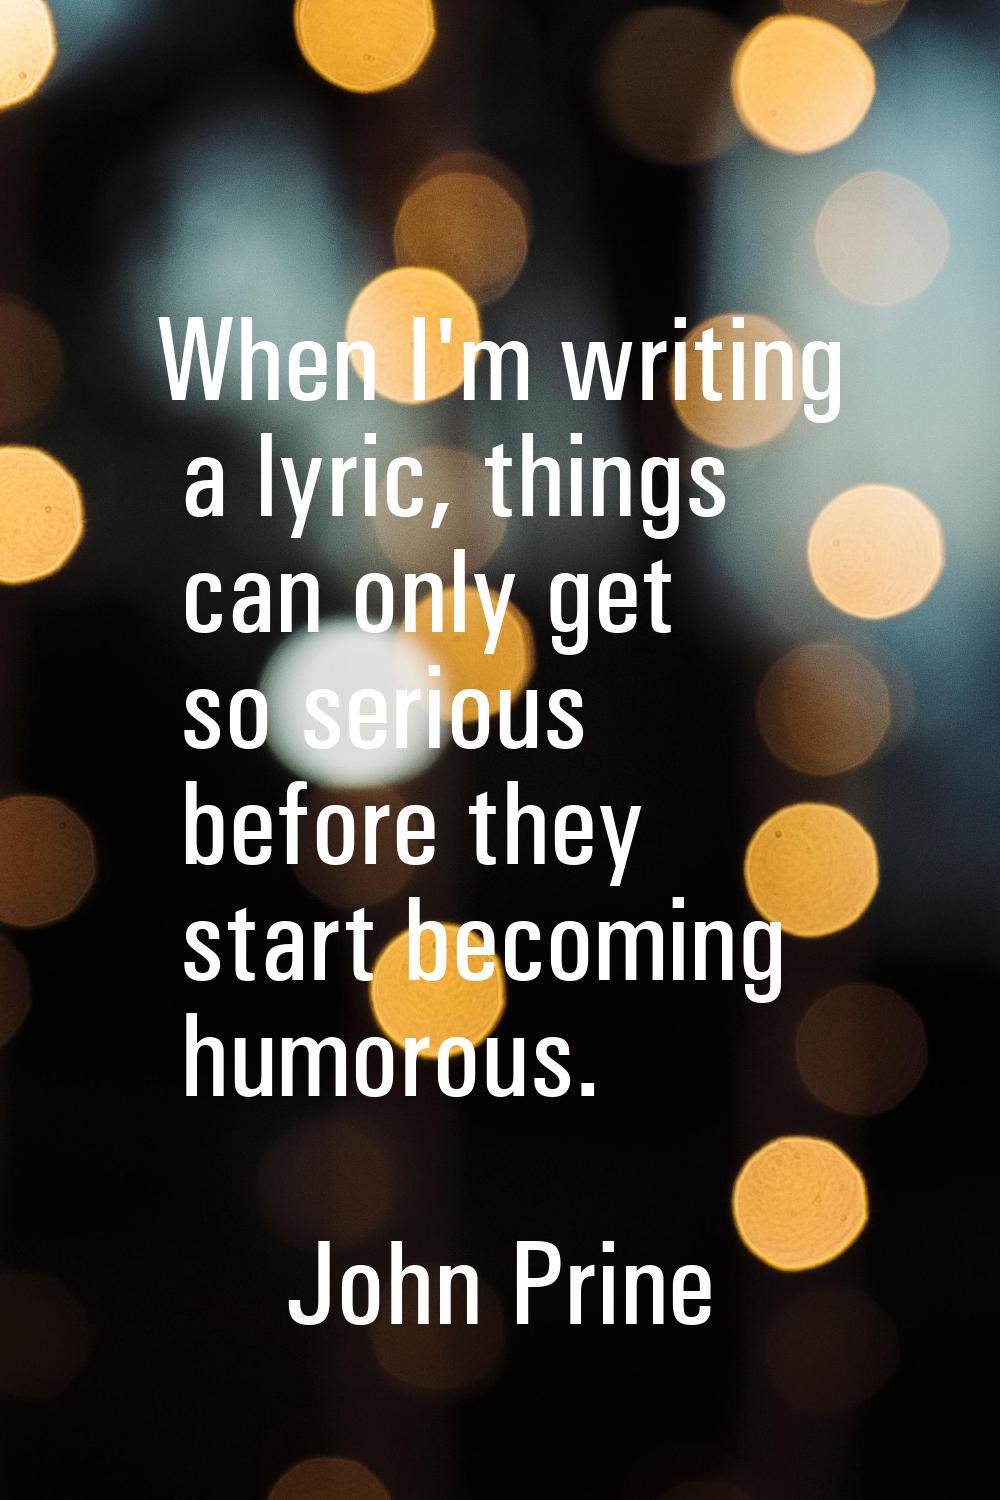 When I'm writing a lyric, things can only get so serious before they start becoming humorous.